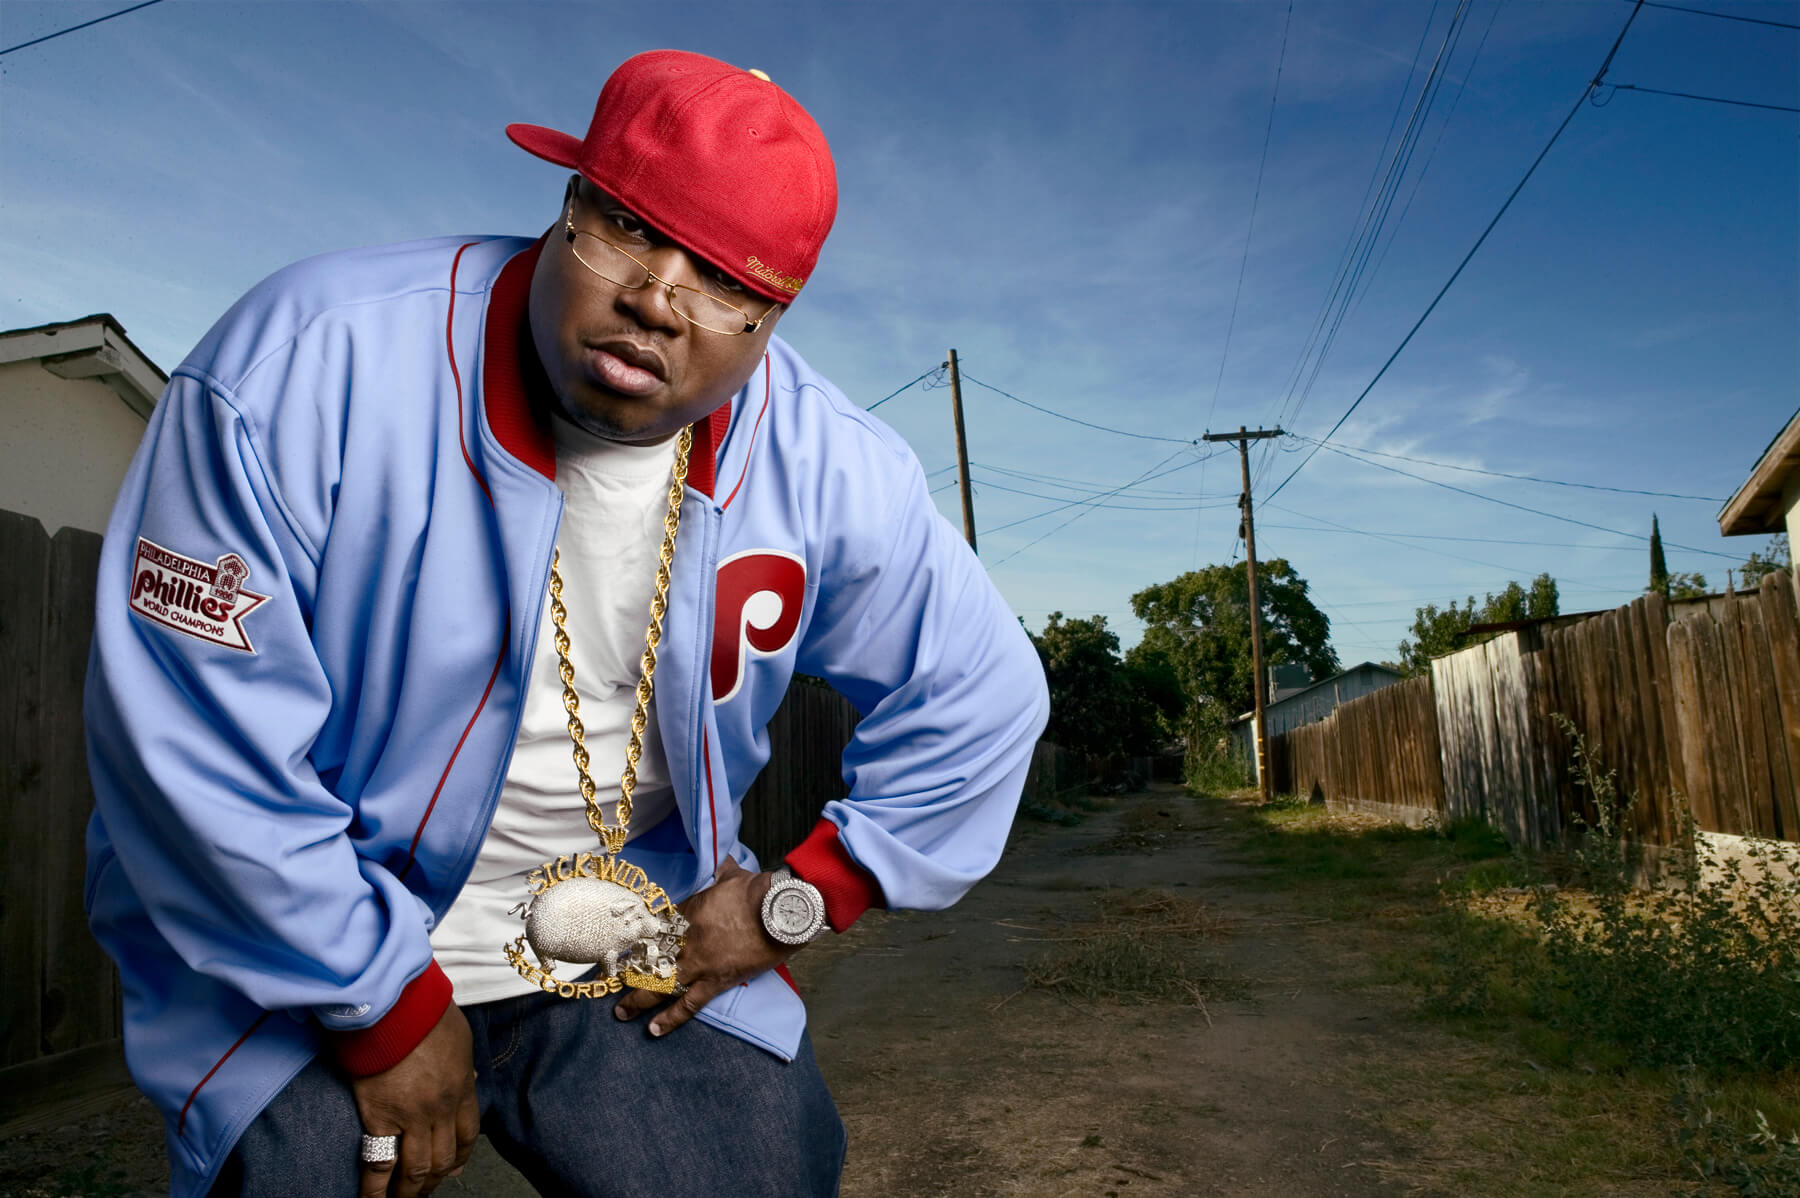 Thought on E40? Out of all the old school rappers, he's the main